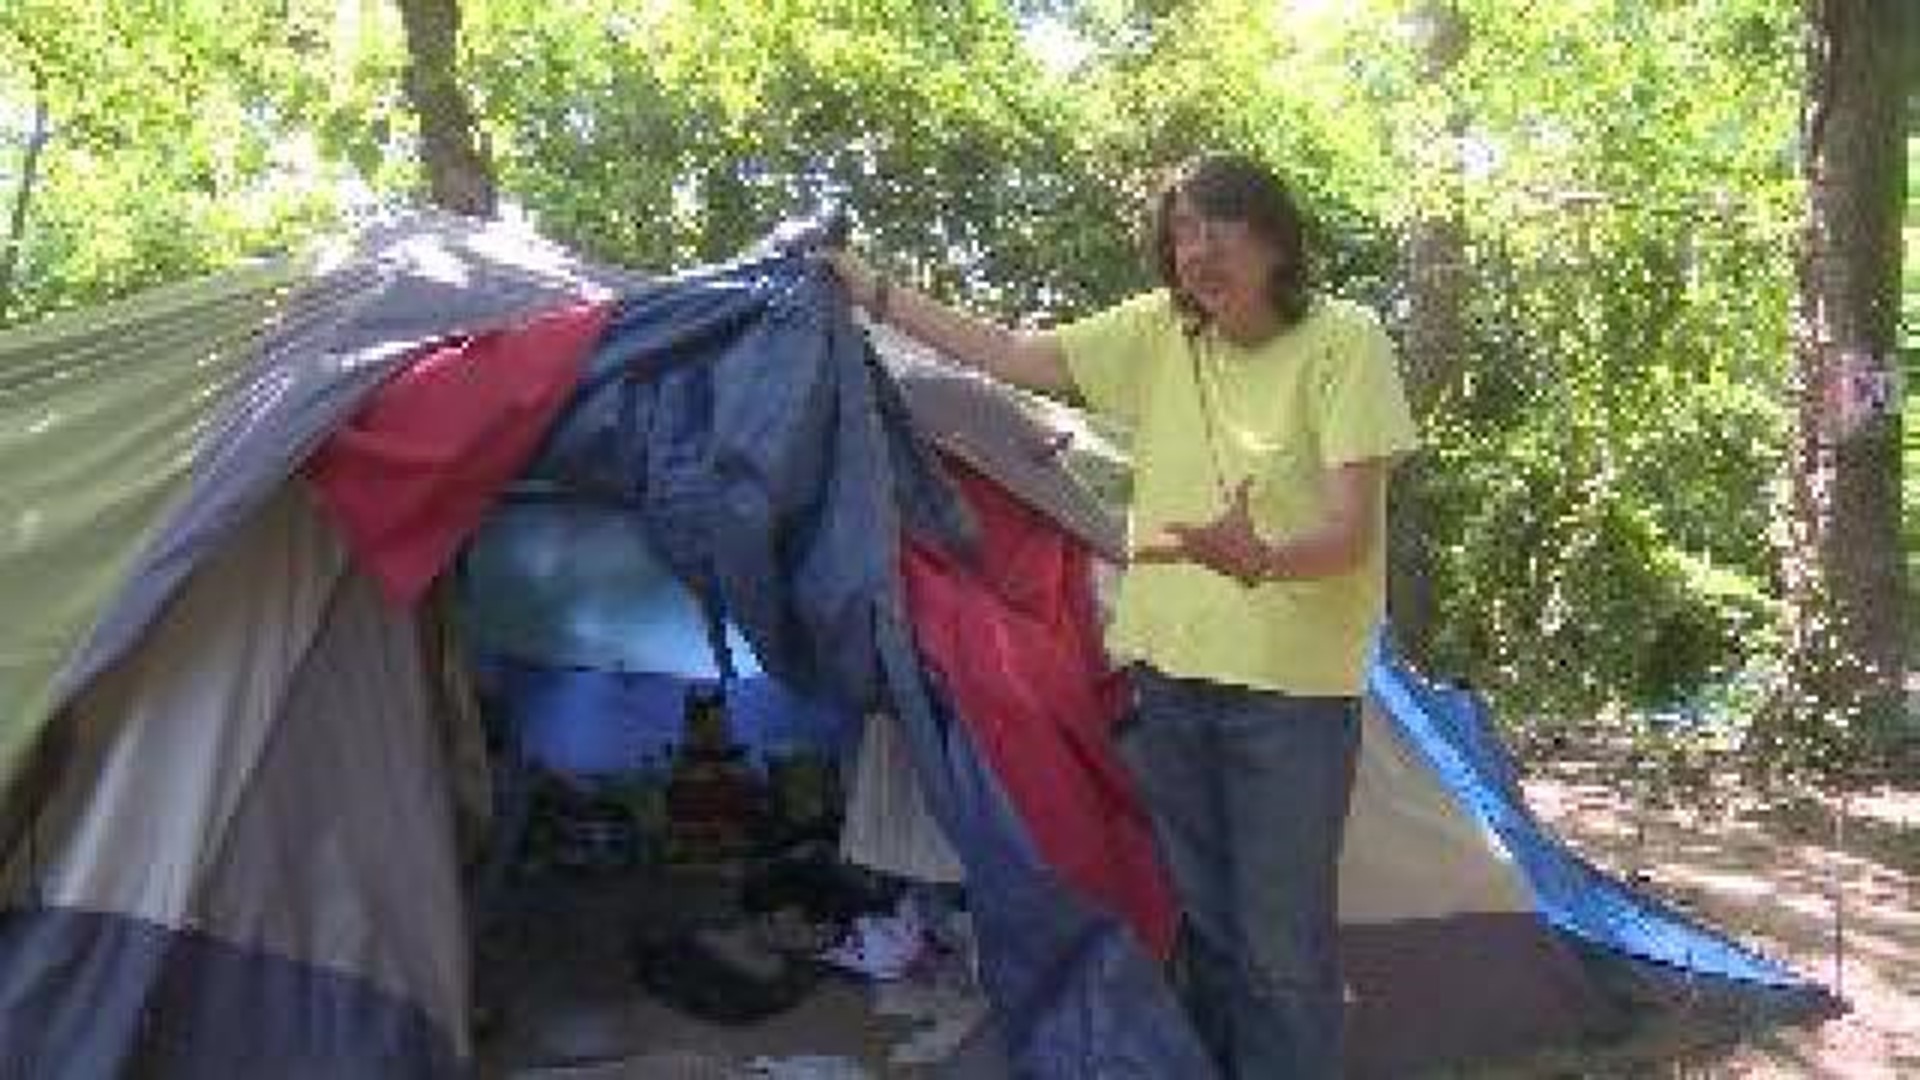 Homeless told to move camp